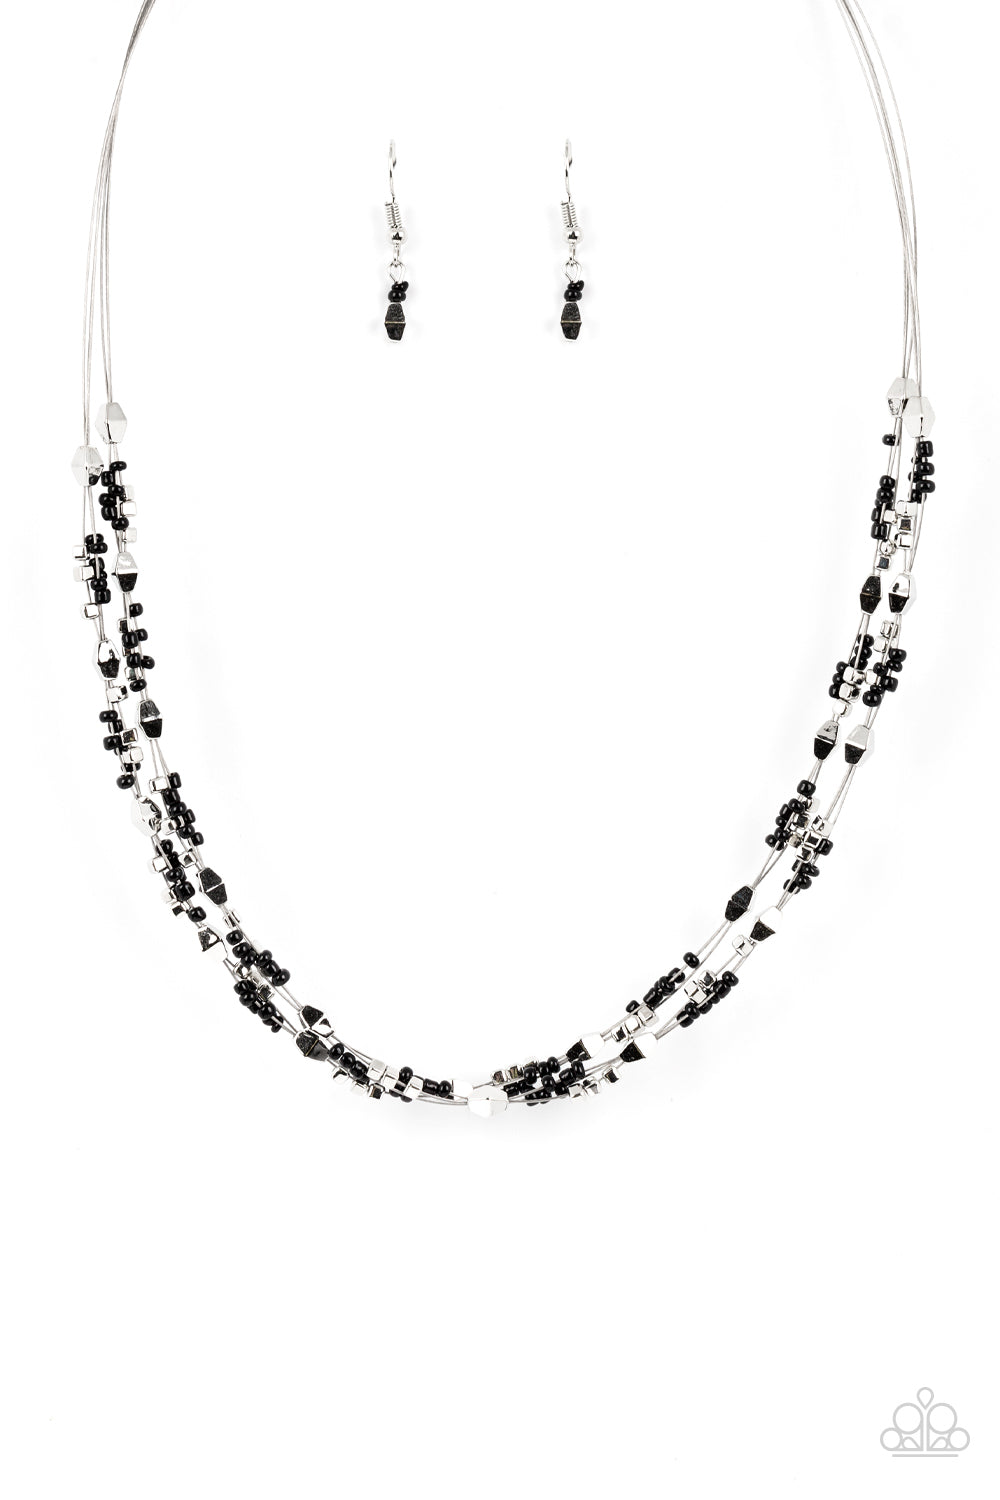 Explore Every Angle Paparazzi Accessories Necklace with Earrings Black